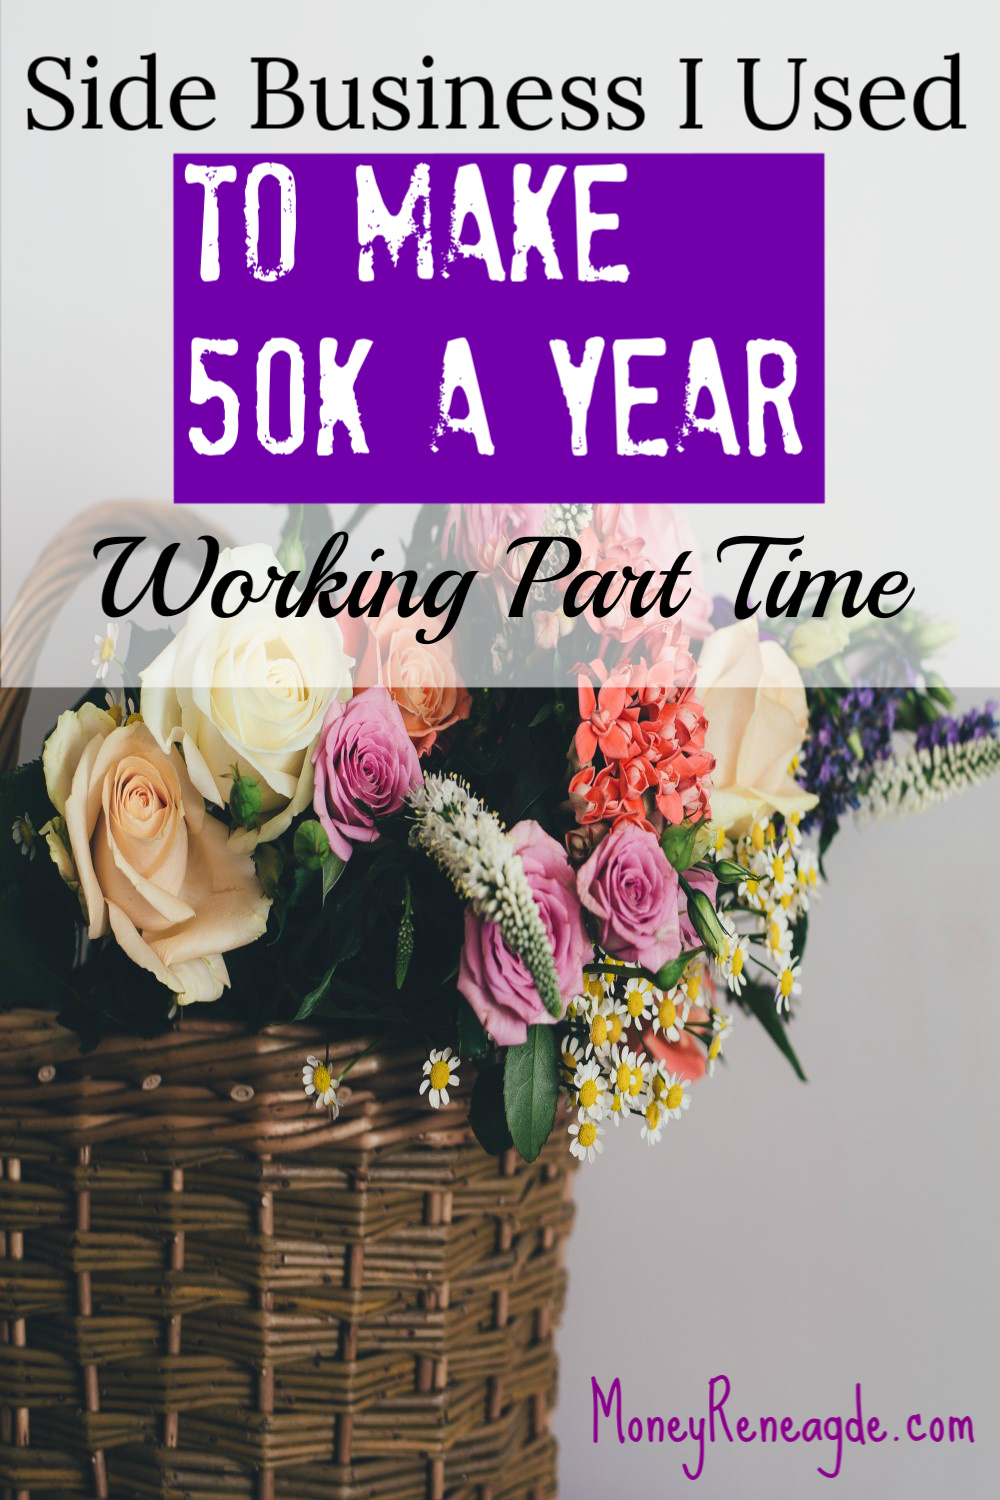 3 Businesses I have done to make 50k a year part time